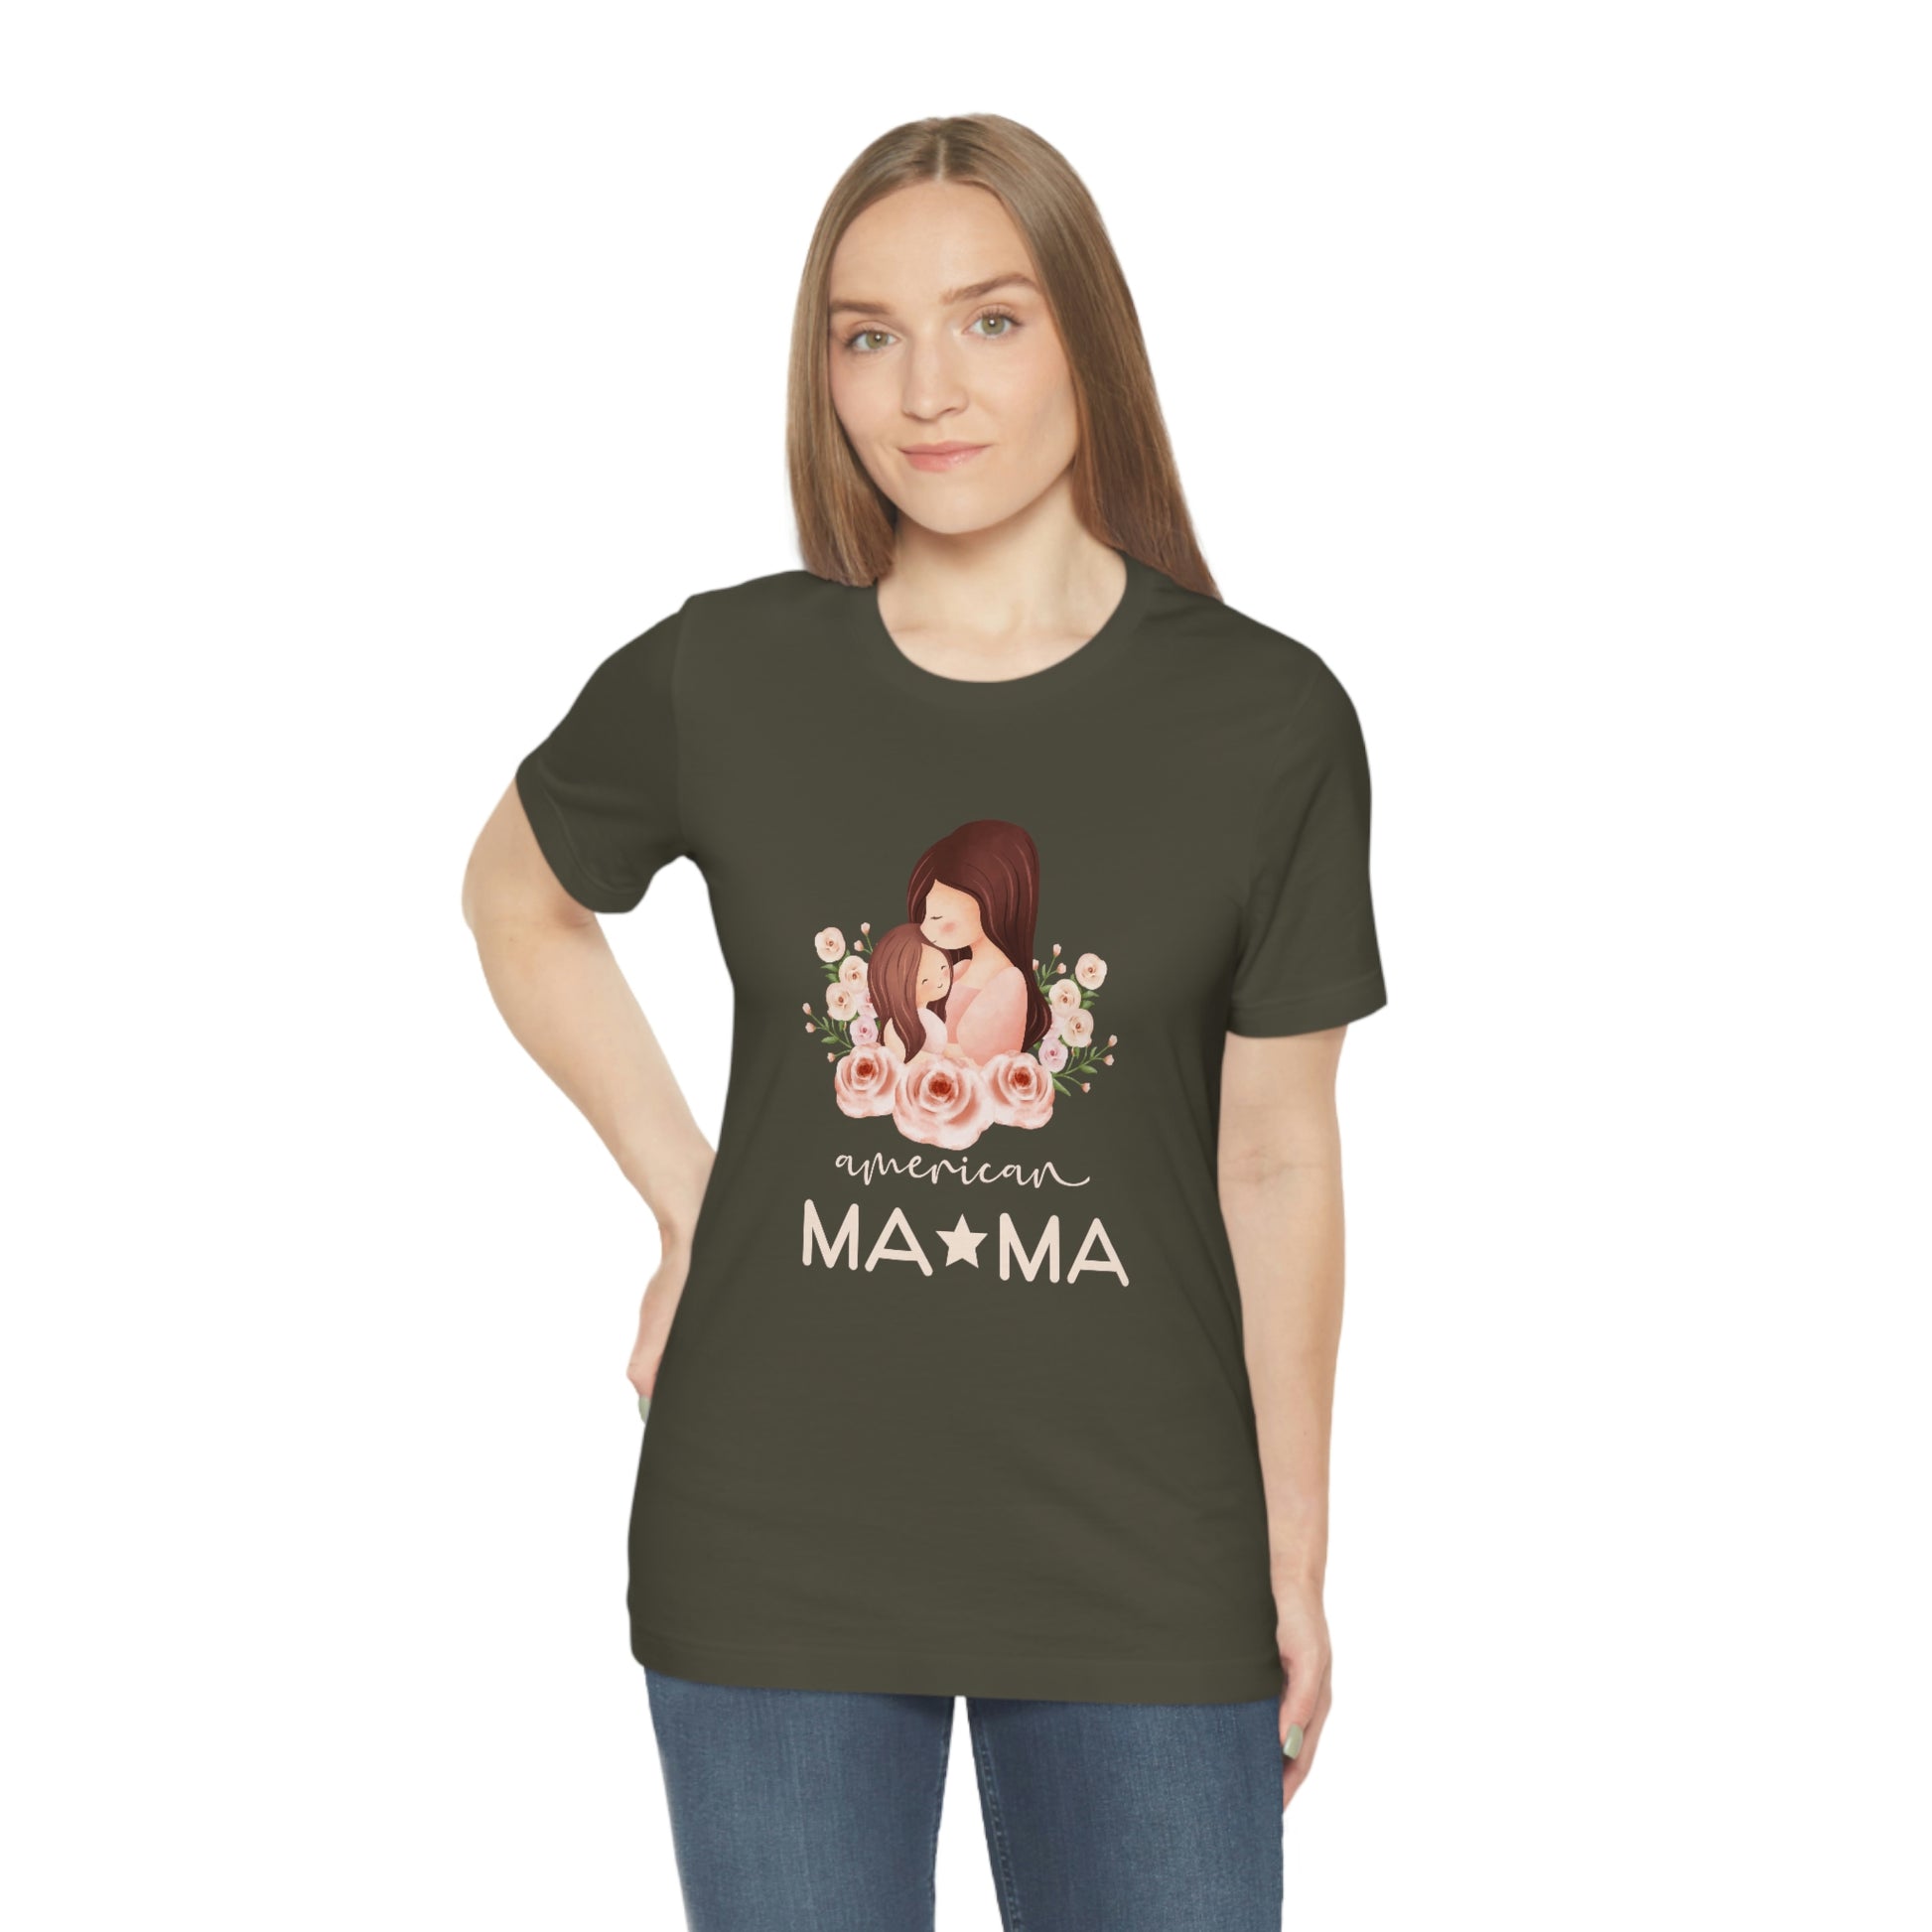 Get ready to make a statement with our American Mom army colored jersey short sleeve t-shirt. A perfect Mother's Day gift for any mom. Celebrate her with this unique and stylish t-shirt.